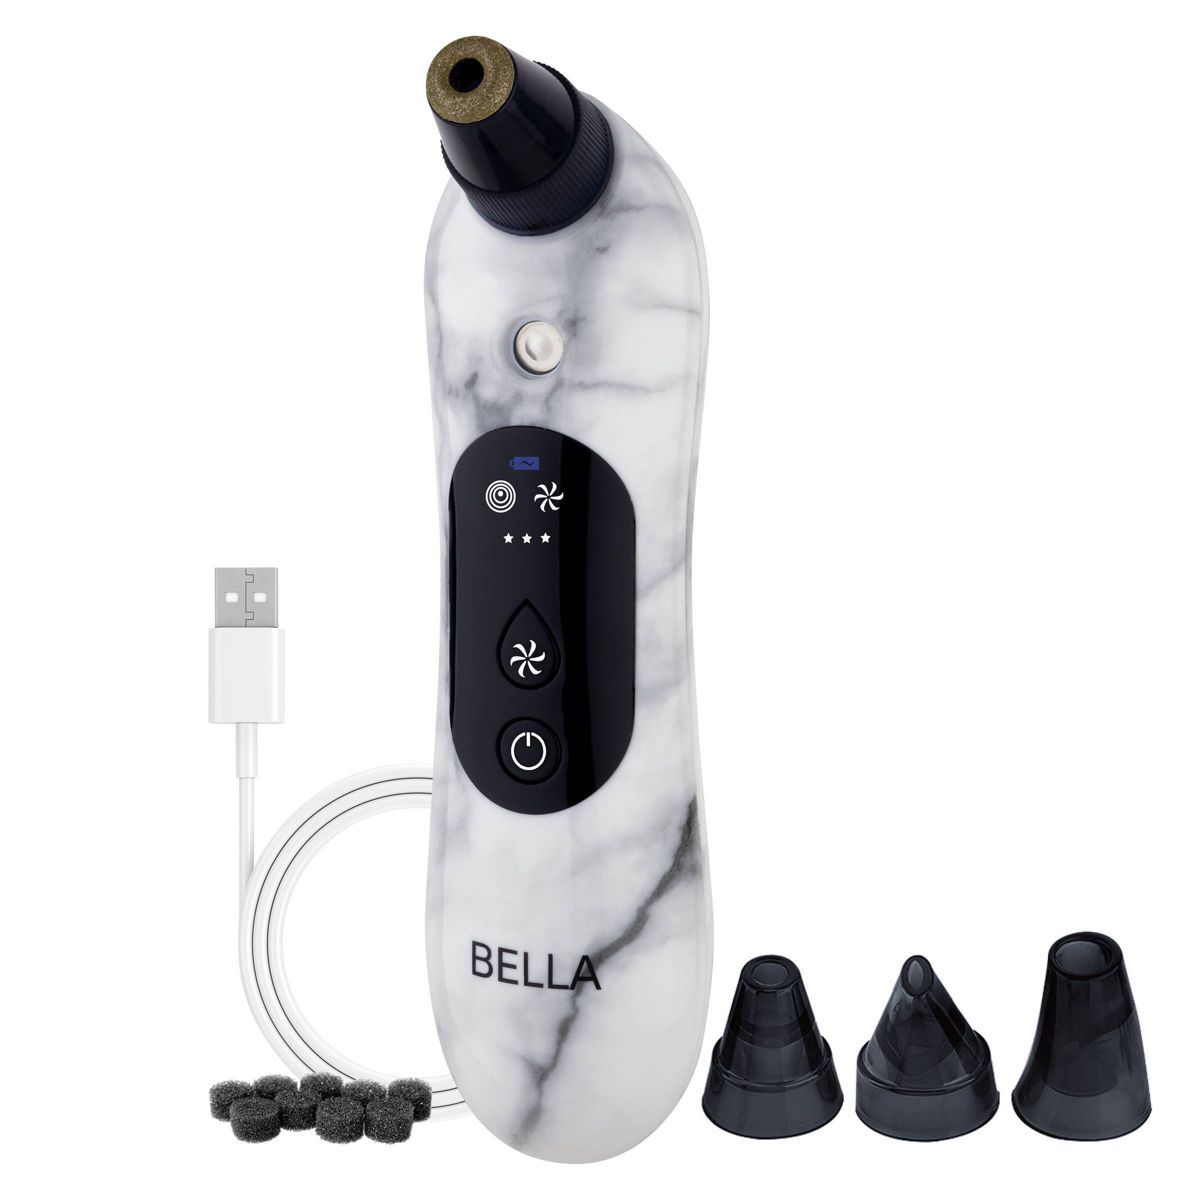 Spa Sciences BELLA 3-in-1 Diamond Tip Microdermabrasion System, with Nano Mist & Pore Extraction | Target